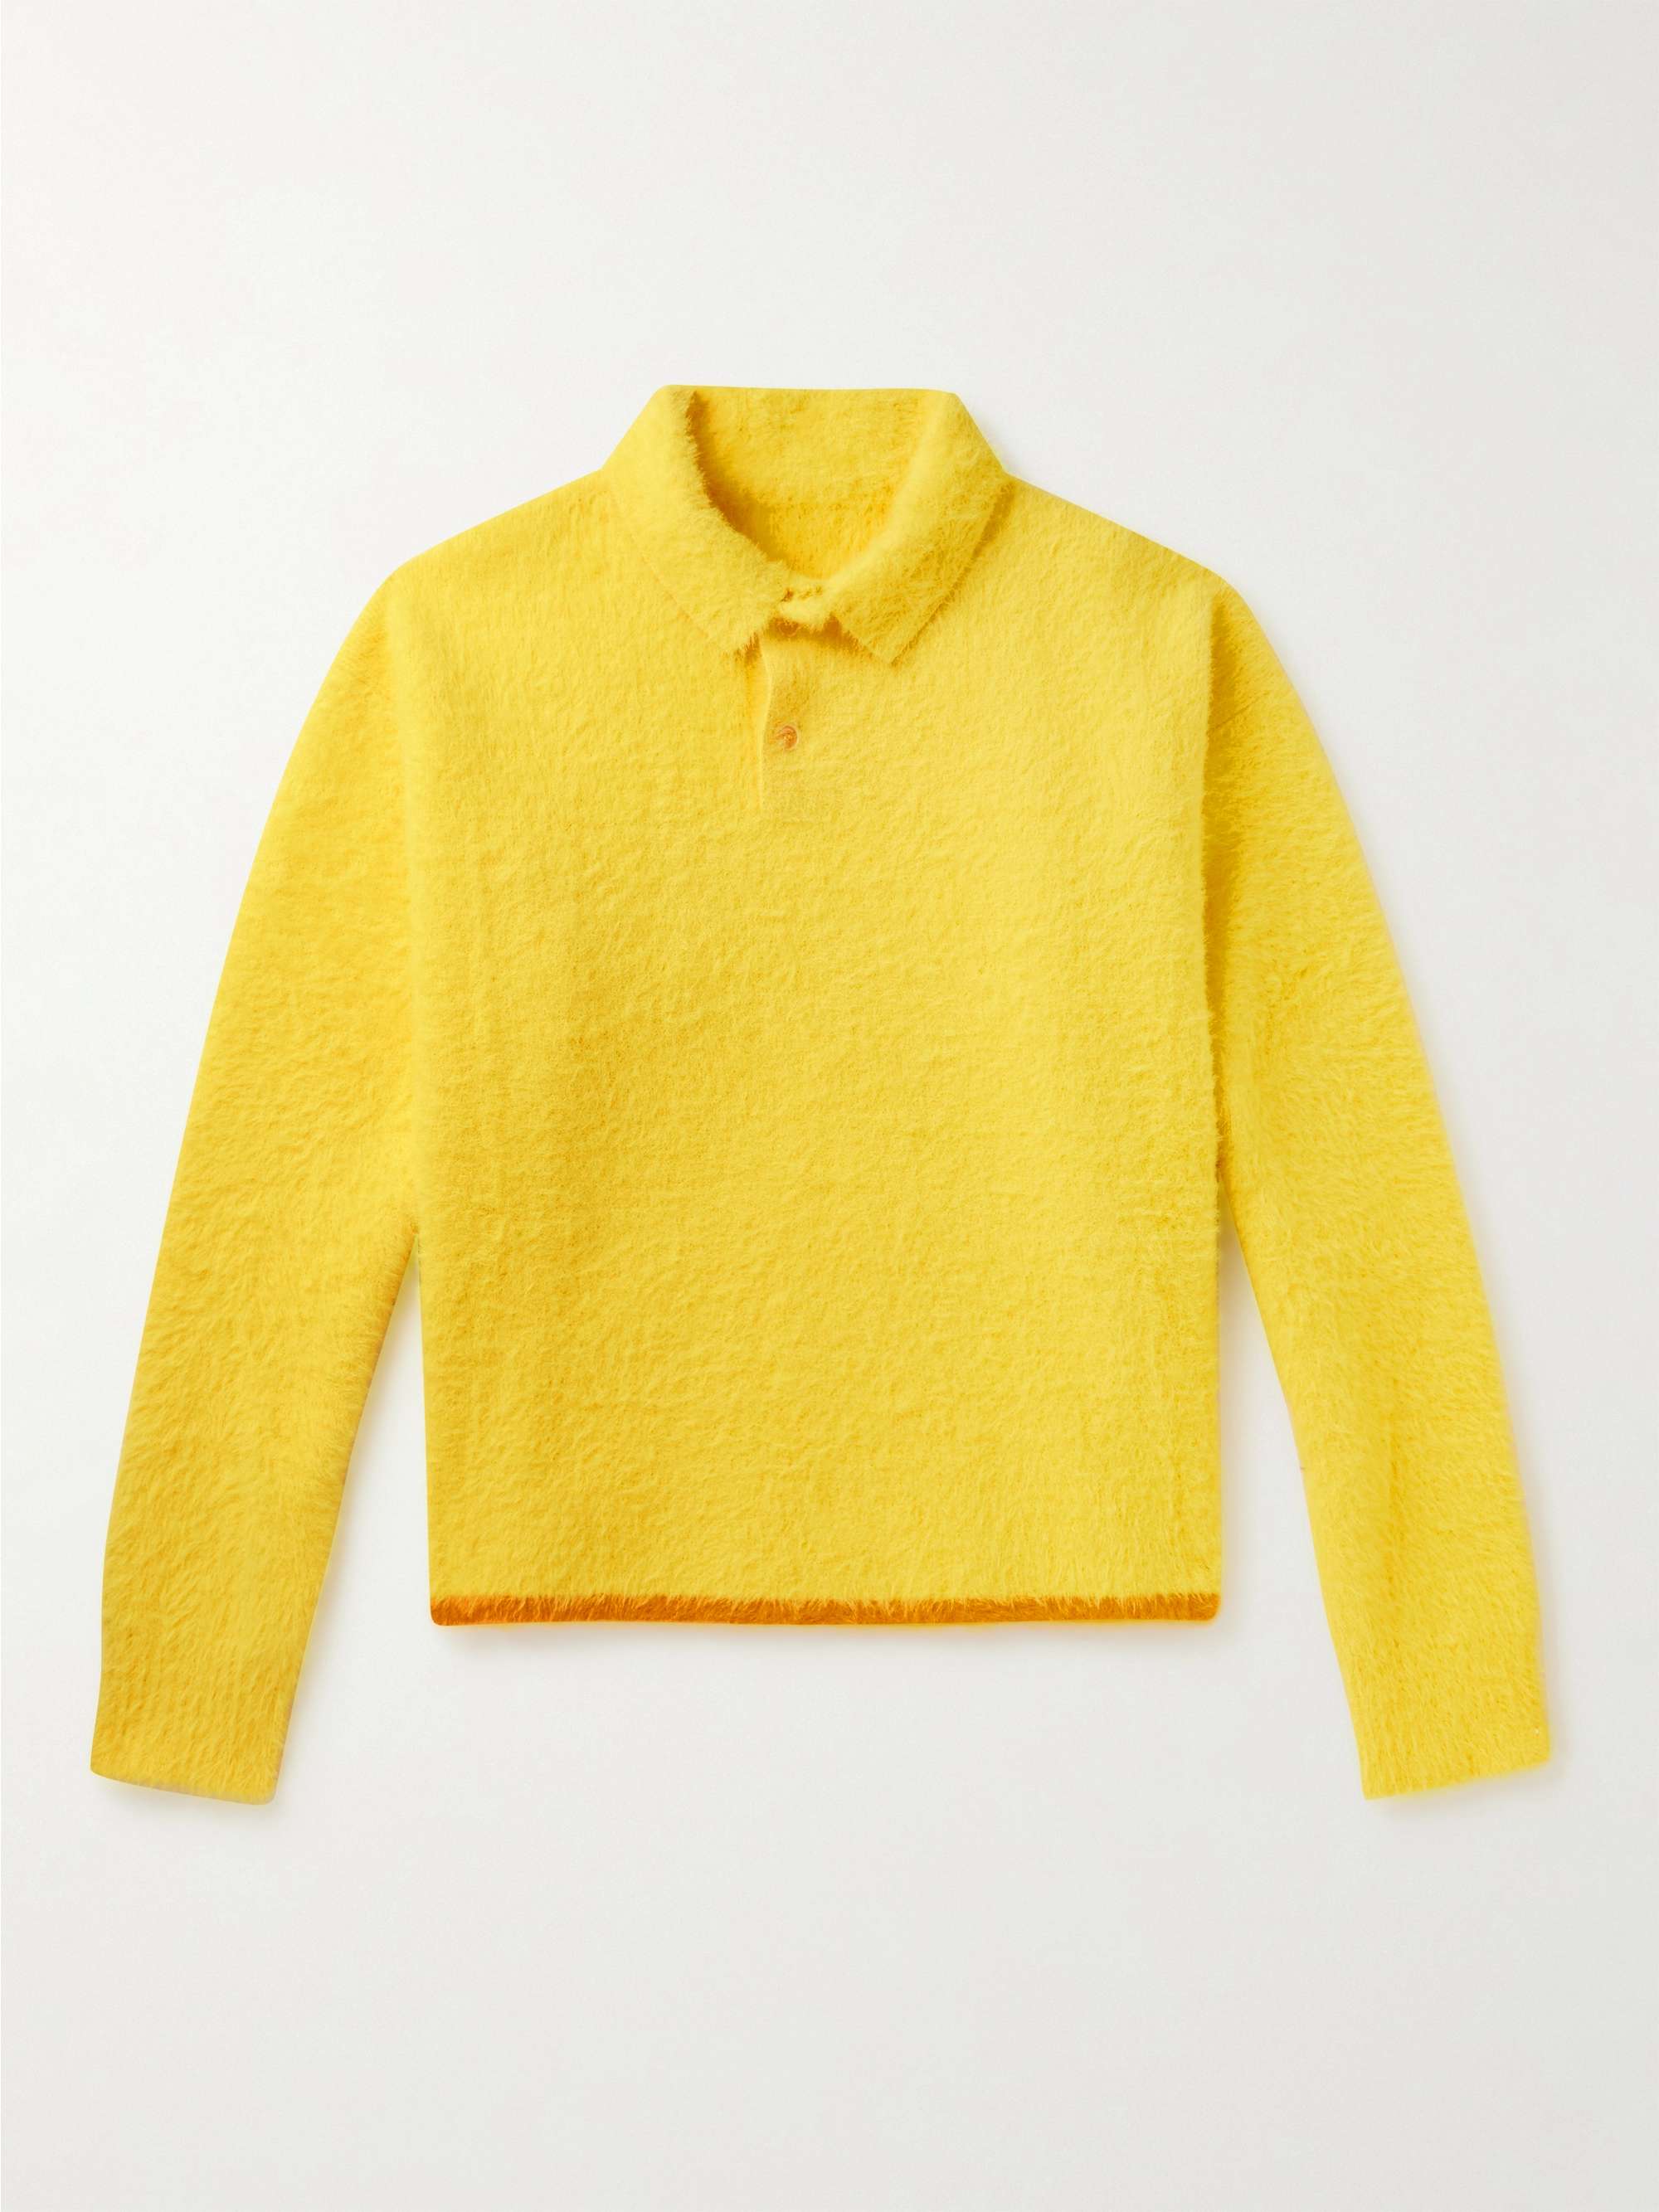 Yellow Polo Neve Brushed-Knit Sweater | JACQUEMUS | MR PORTER